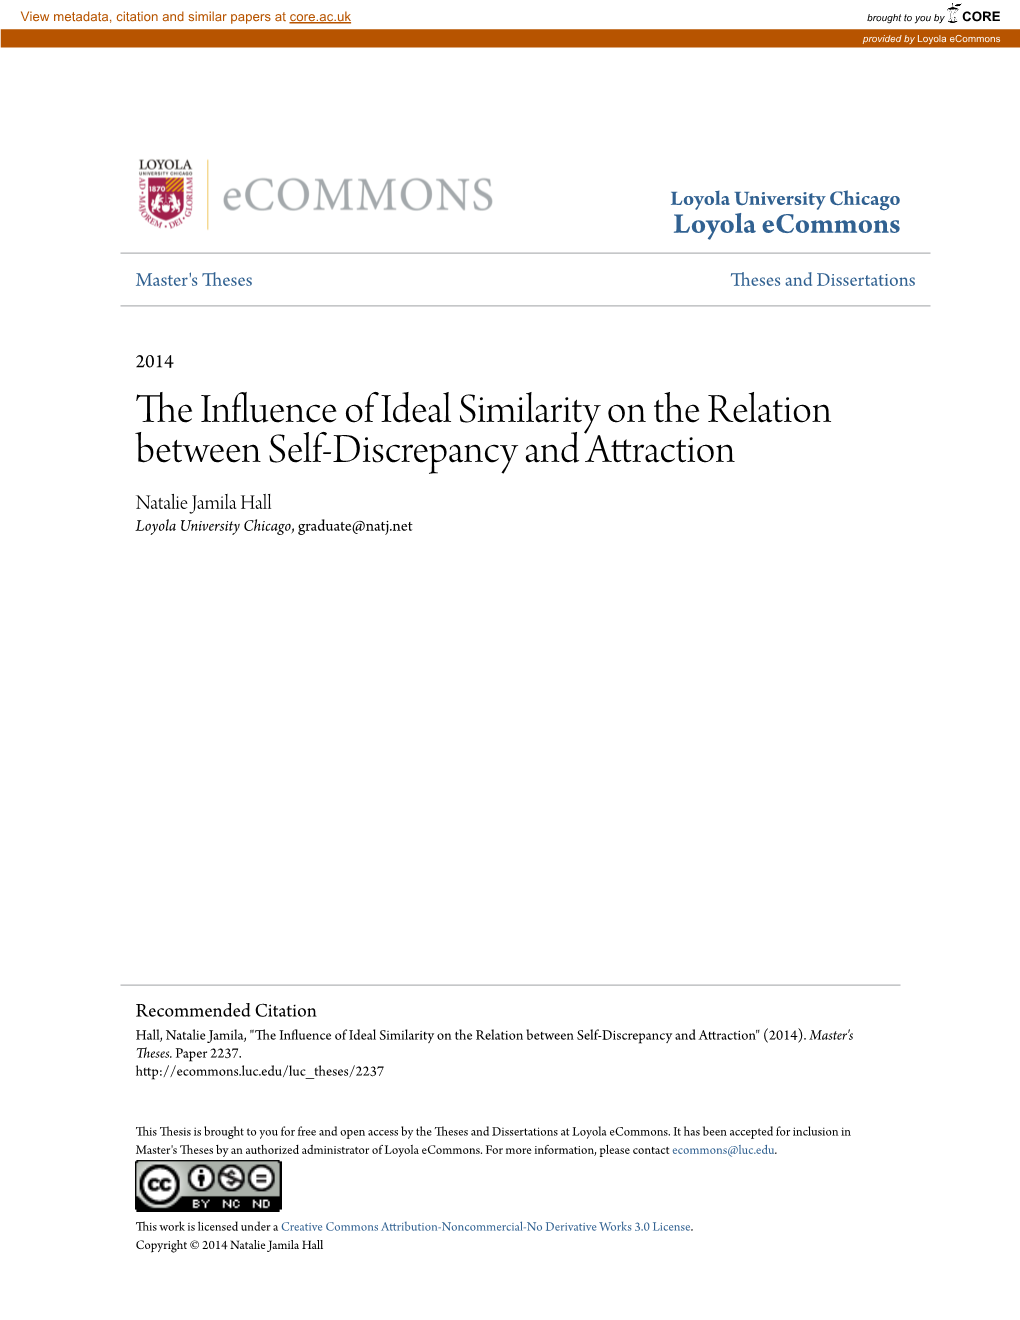 The Influence of Ideal Similarity on the Relation Between Self-Discrepancy and Attraction 1